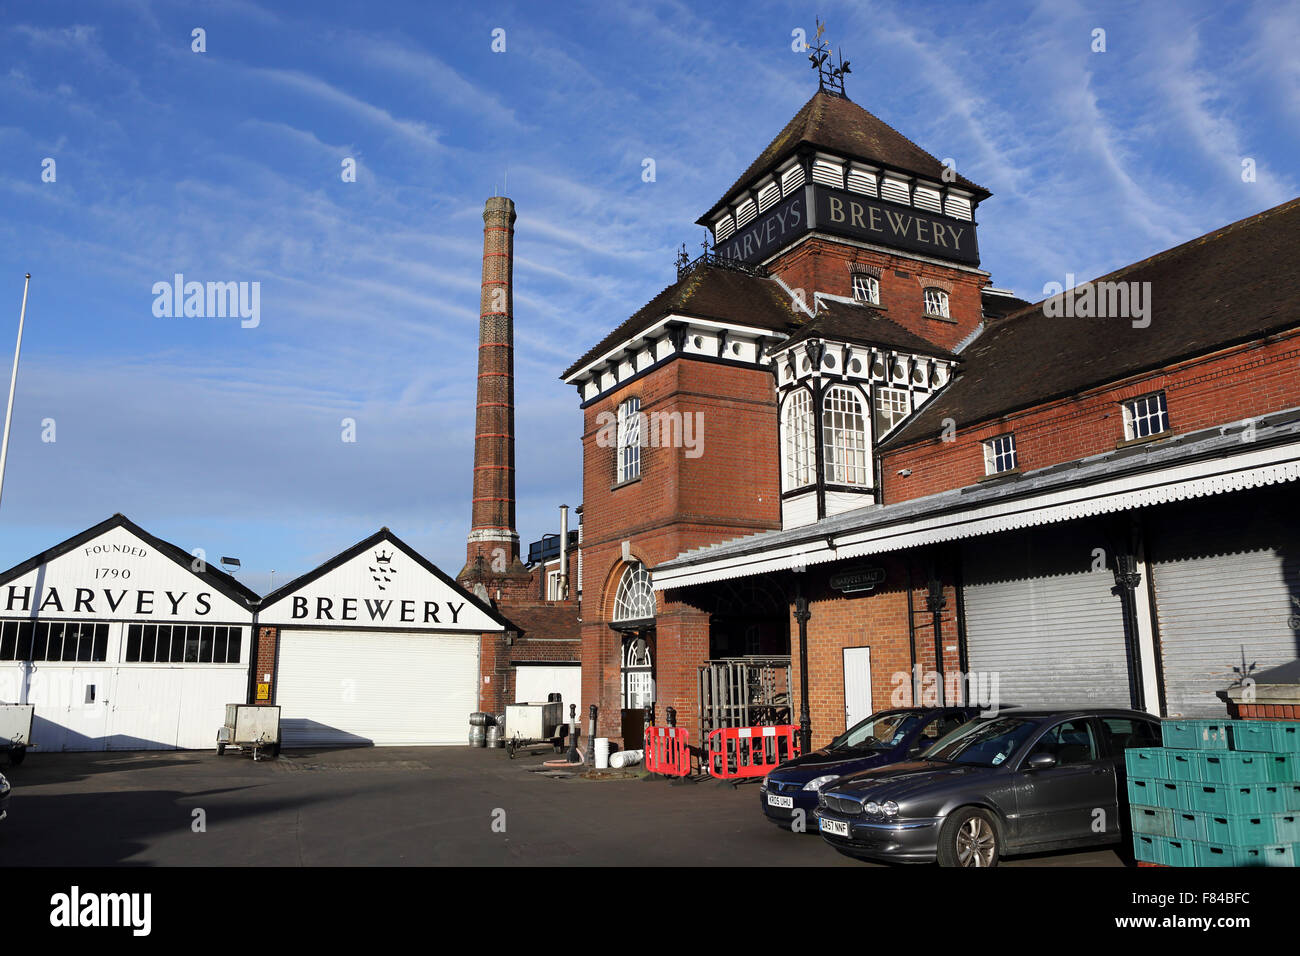 Harveys Brewery in Lewes, England. The brewery was established in 1790. Stock Photo